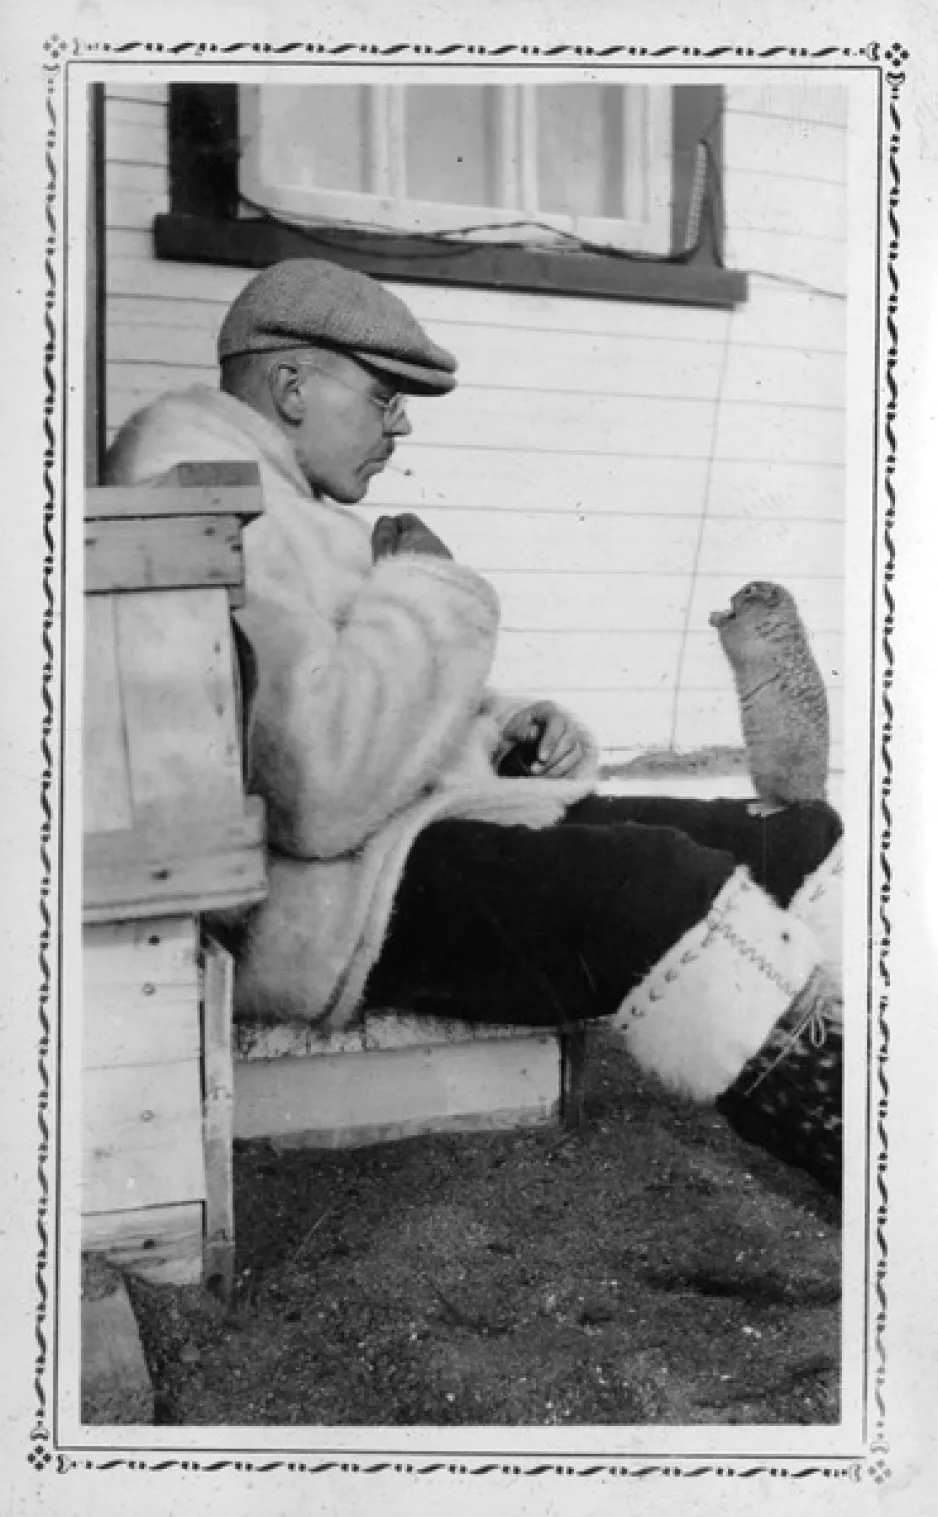 A black and white vertical photograph of a man seated in front of a white house, on the ground hand-feeding a squirrel that is standing on his leg reaching for food.